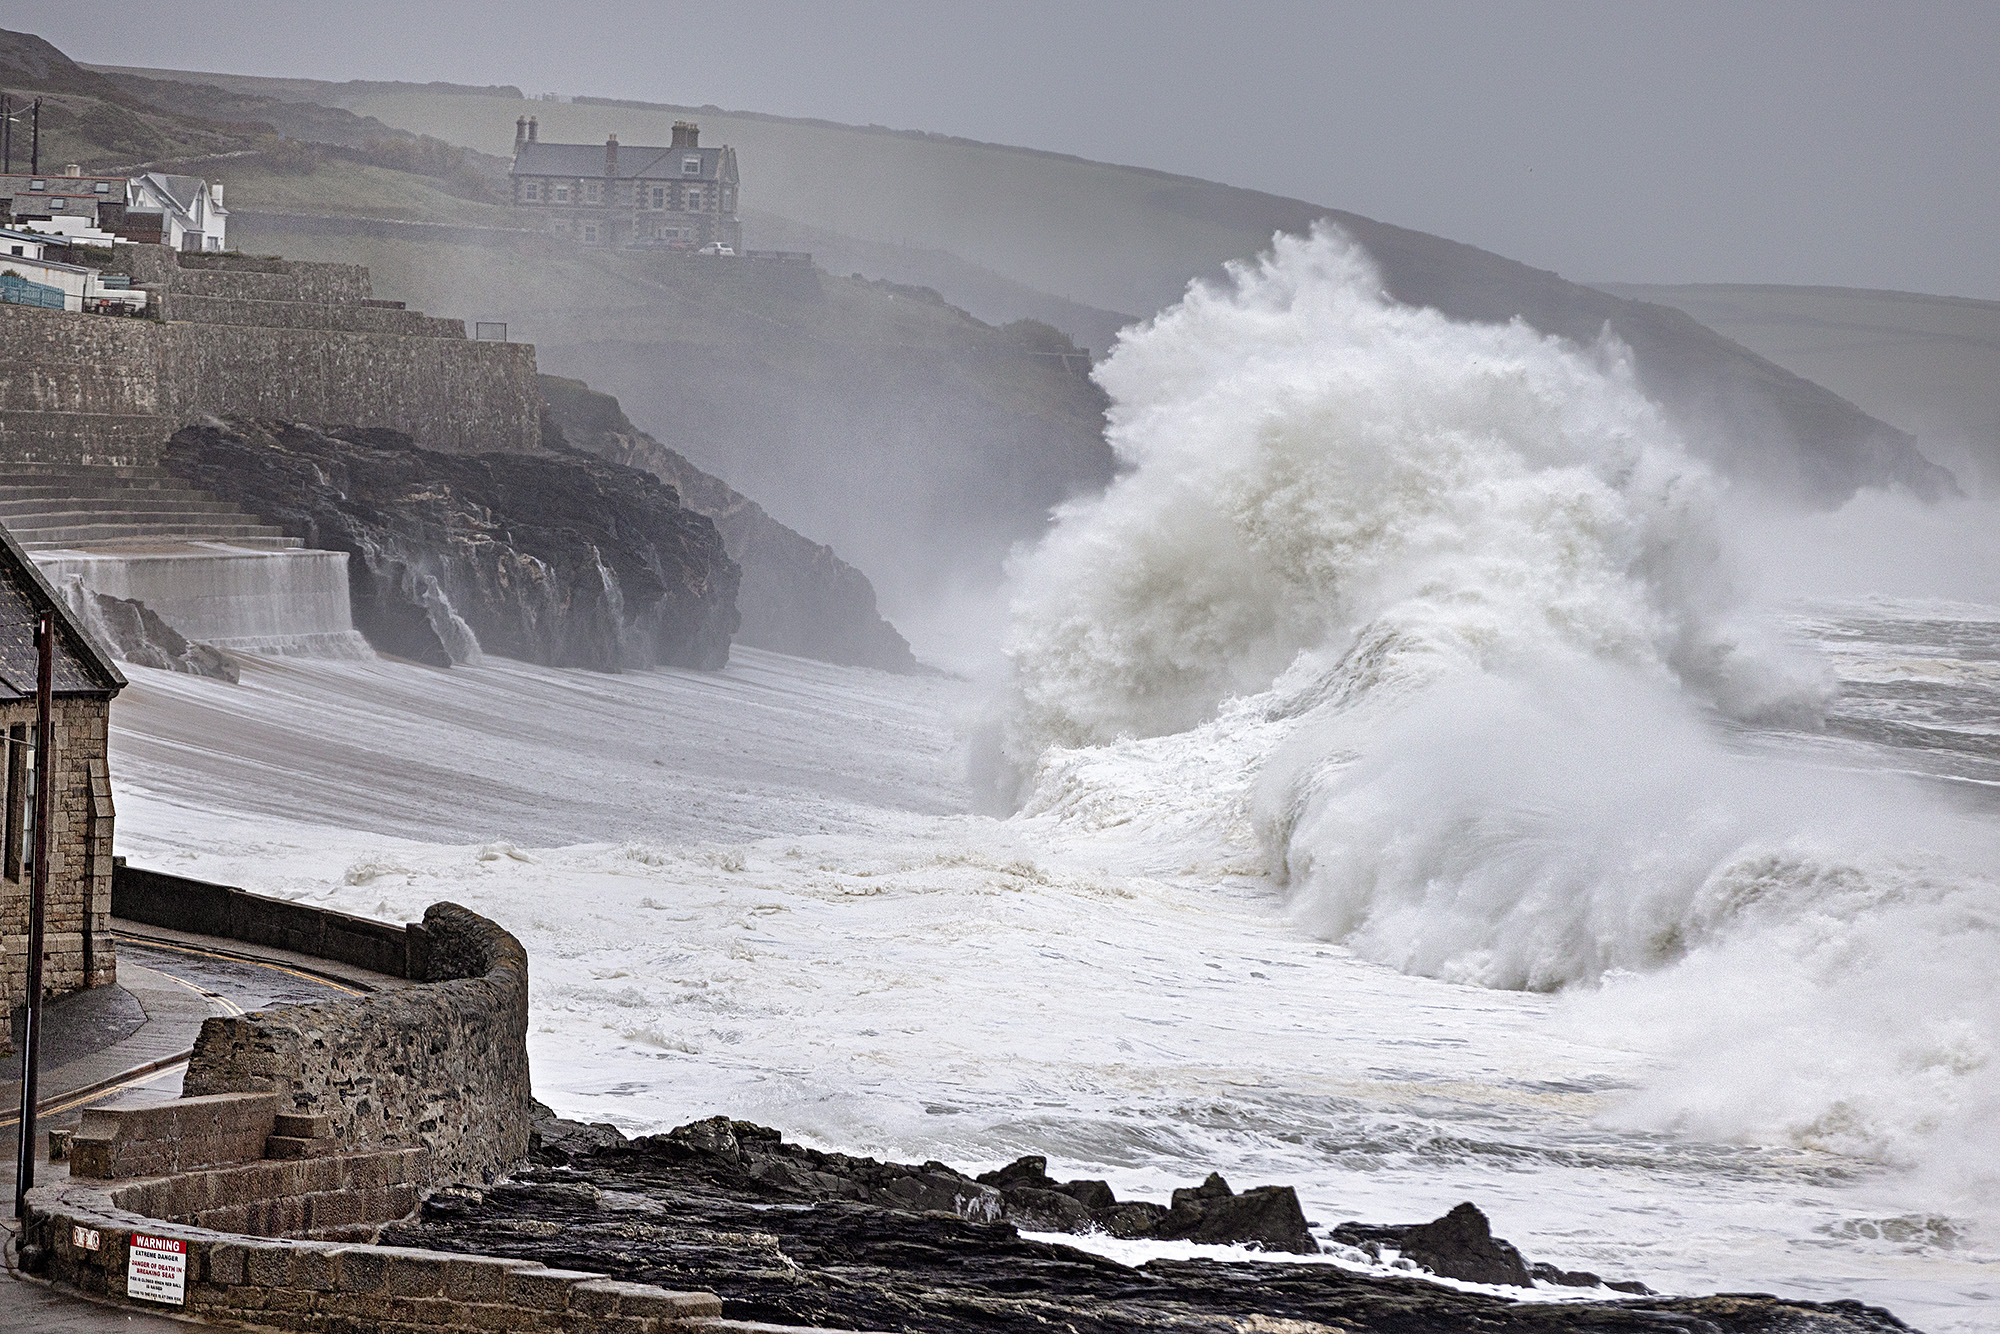 The incredible power of Mother Nature as Storm Ciaran hits Porthleven in Cornwall. 